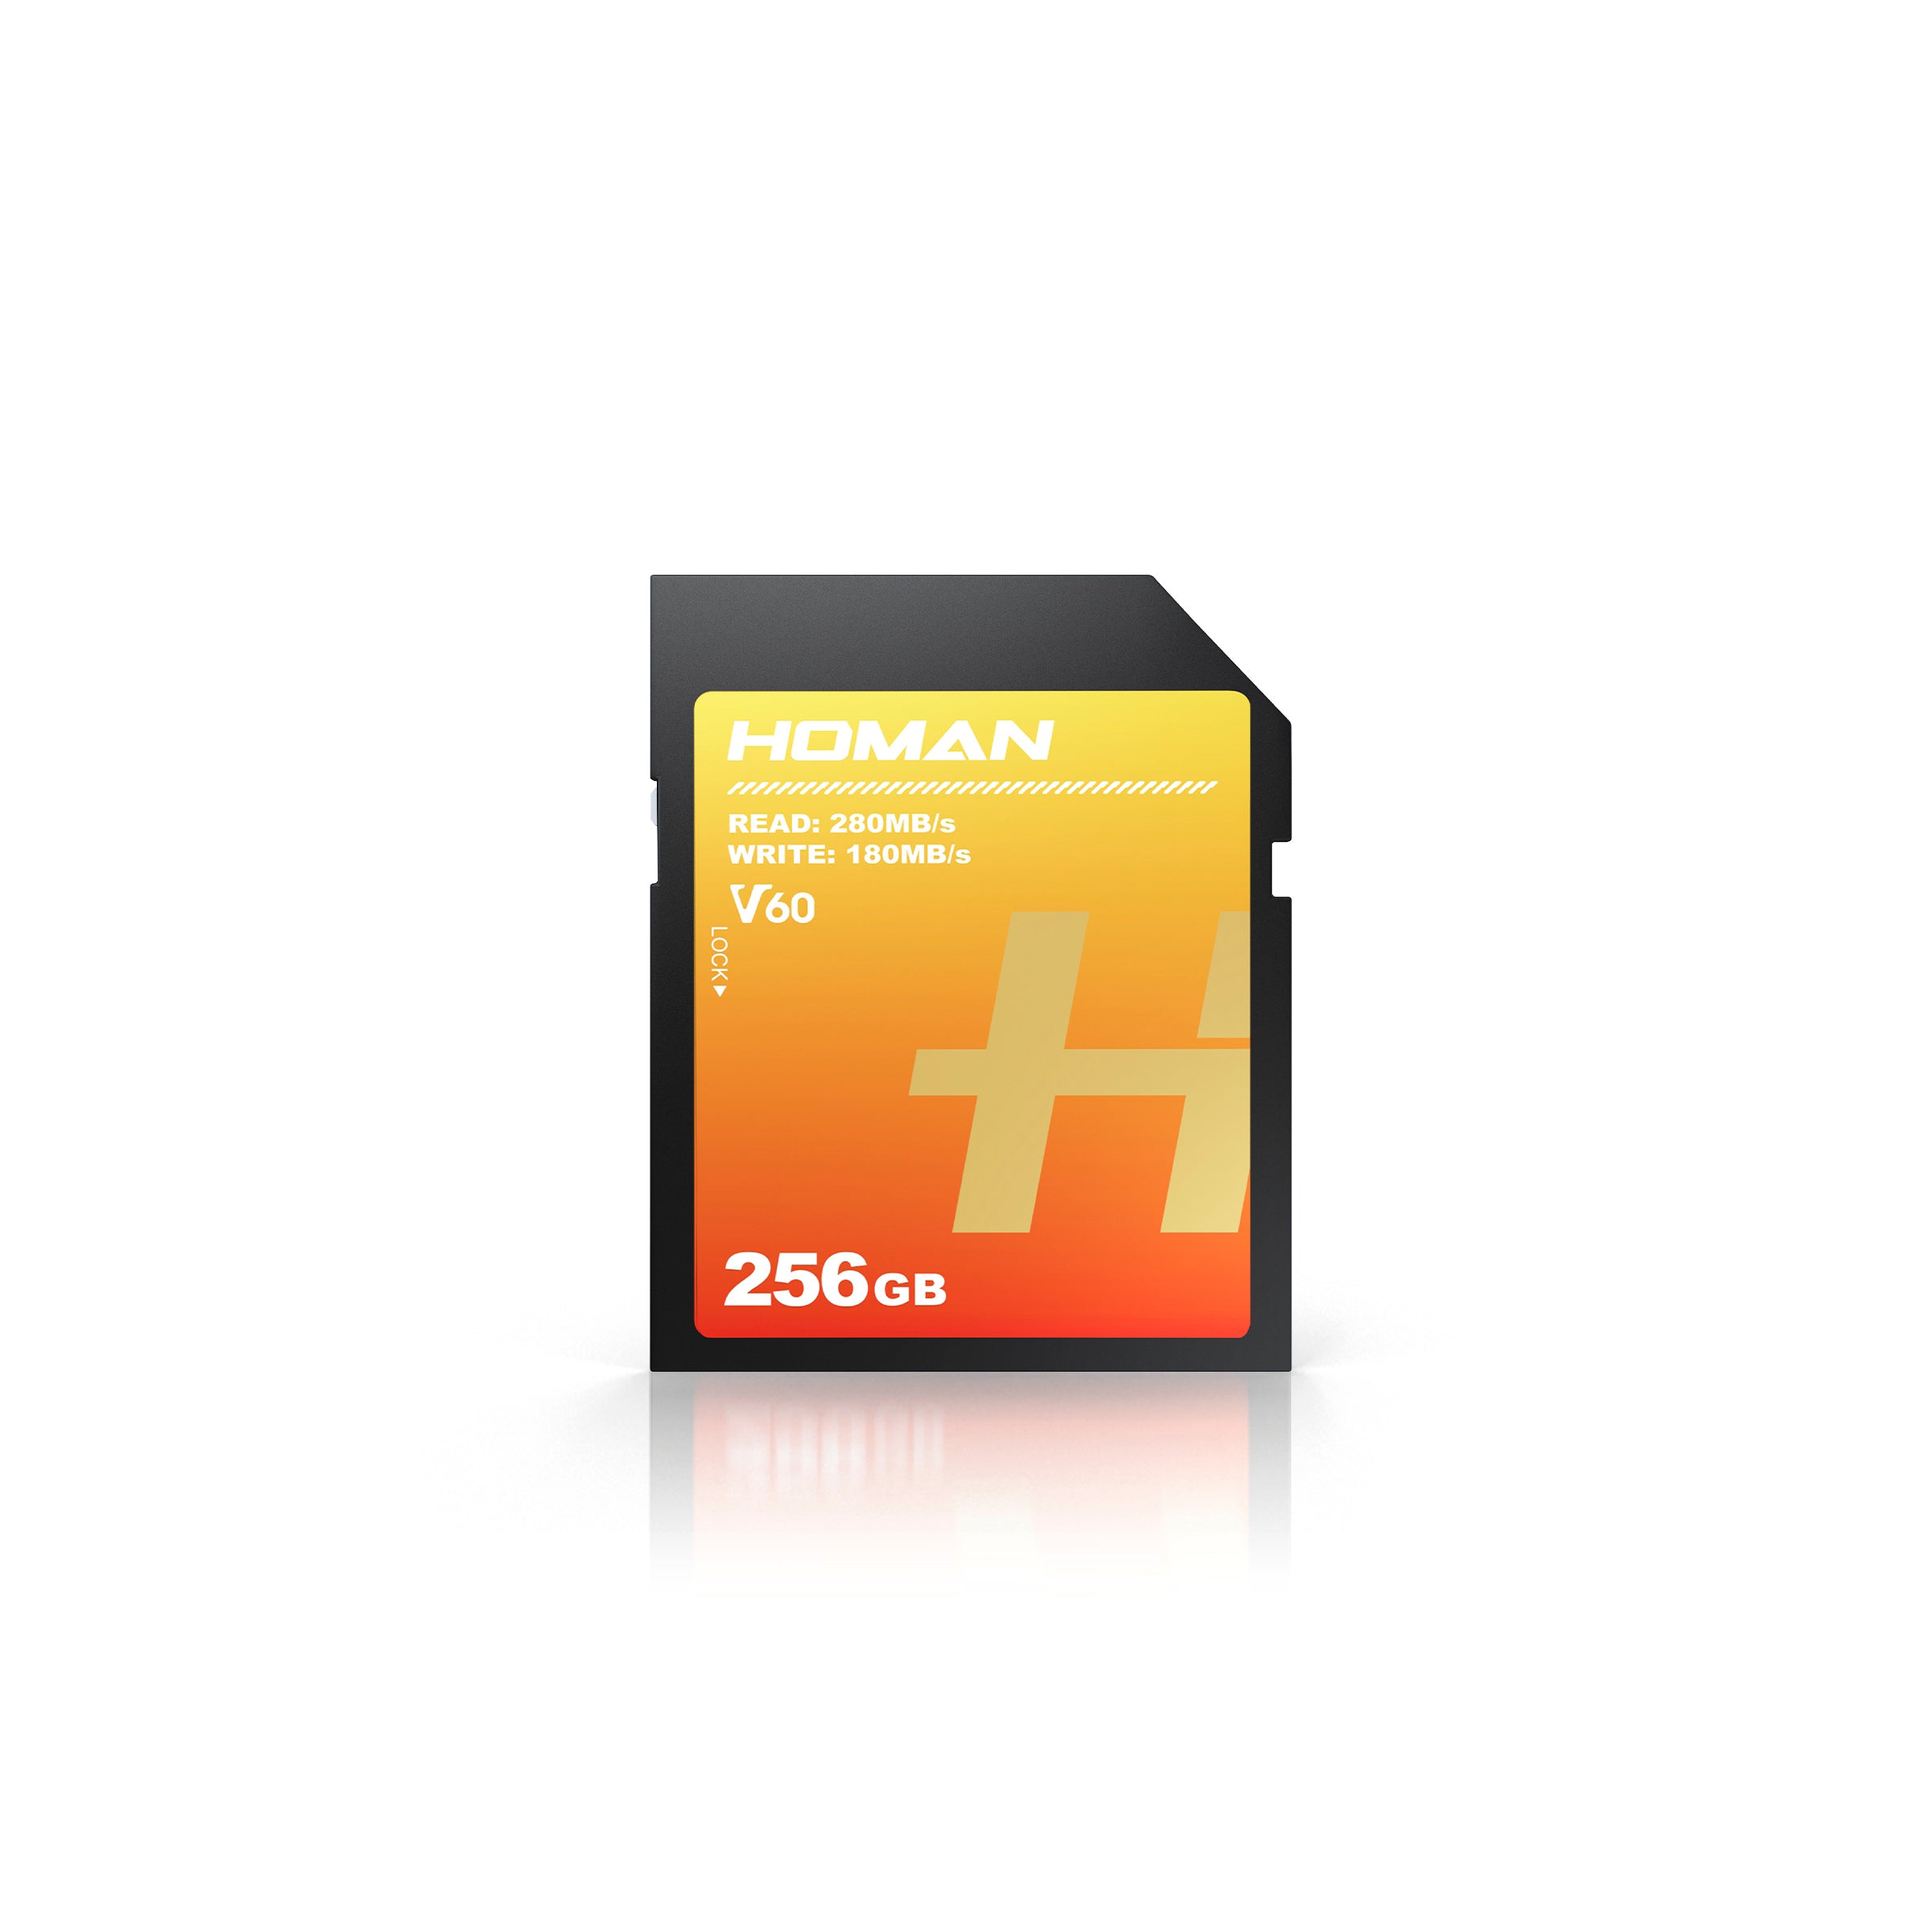 HOMAN UHS-II SD Card (V60) 256GB fit for Any Environmental Temperature from -10 Degree to 70 Degree Celsius with 5 Year Warranty & Recovery